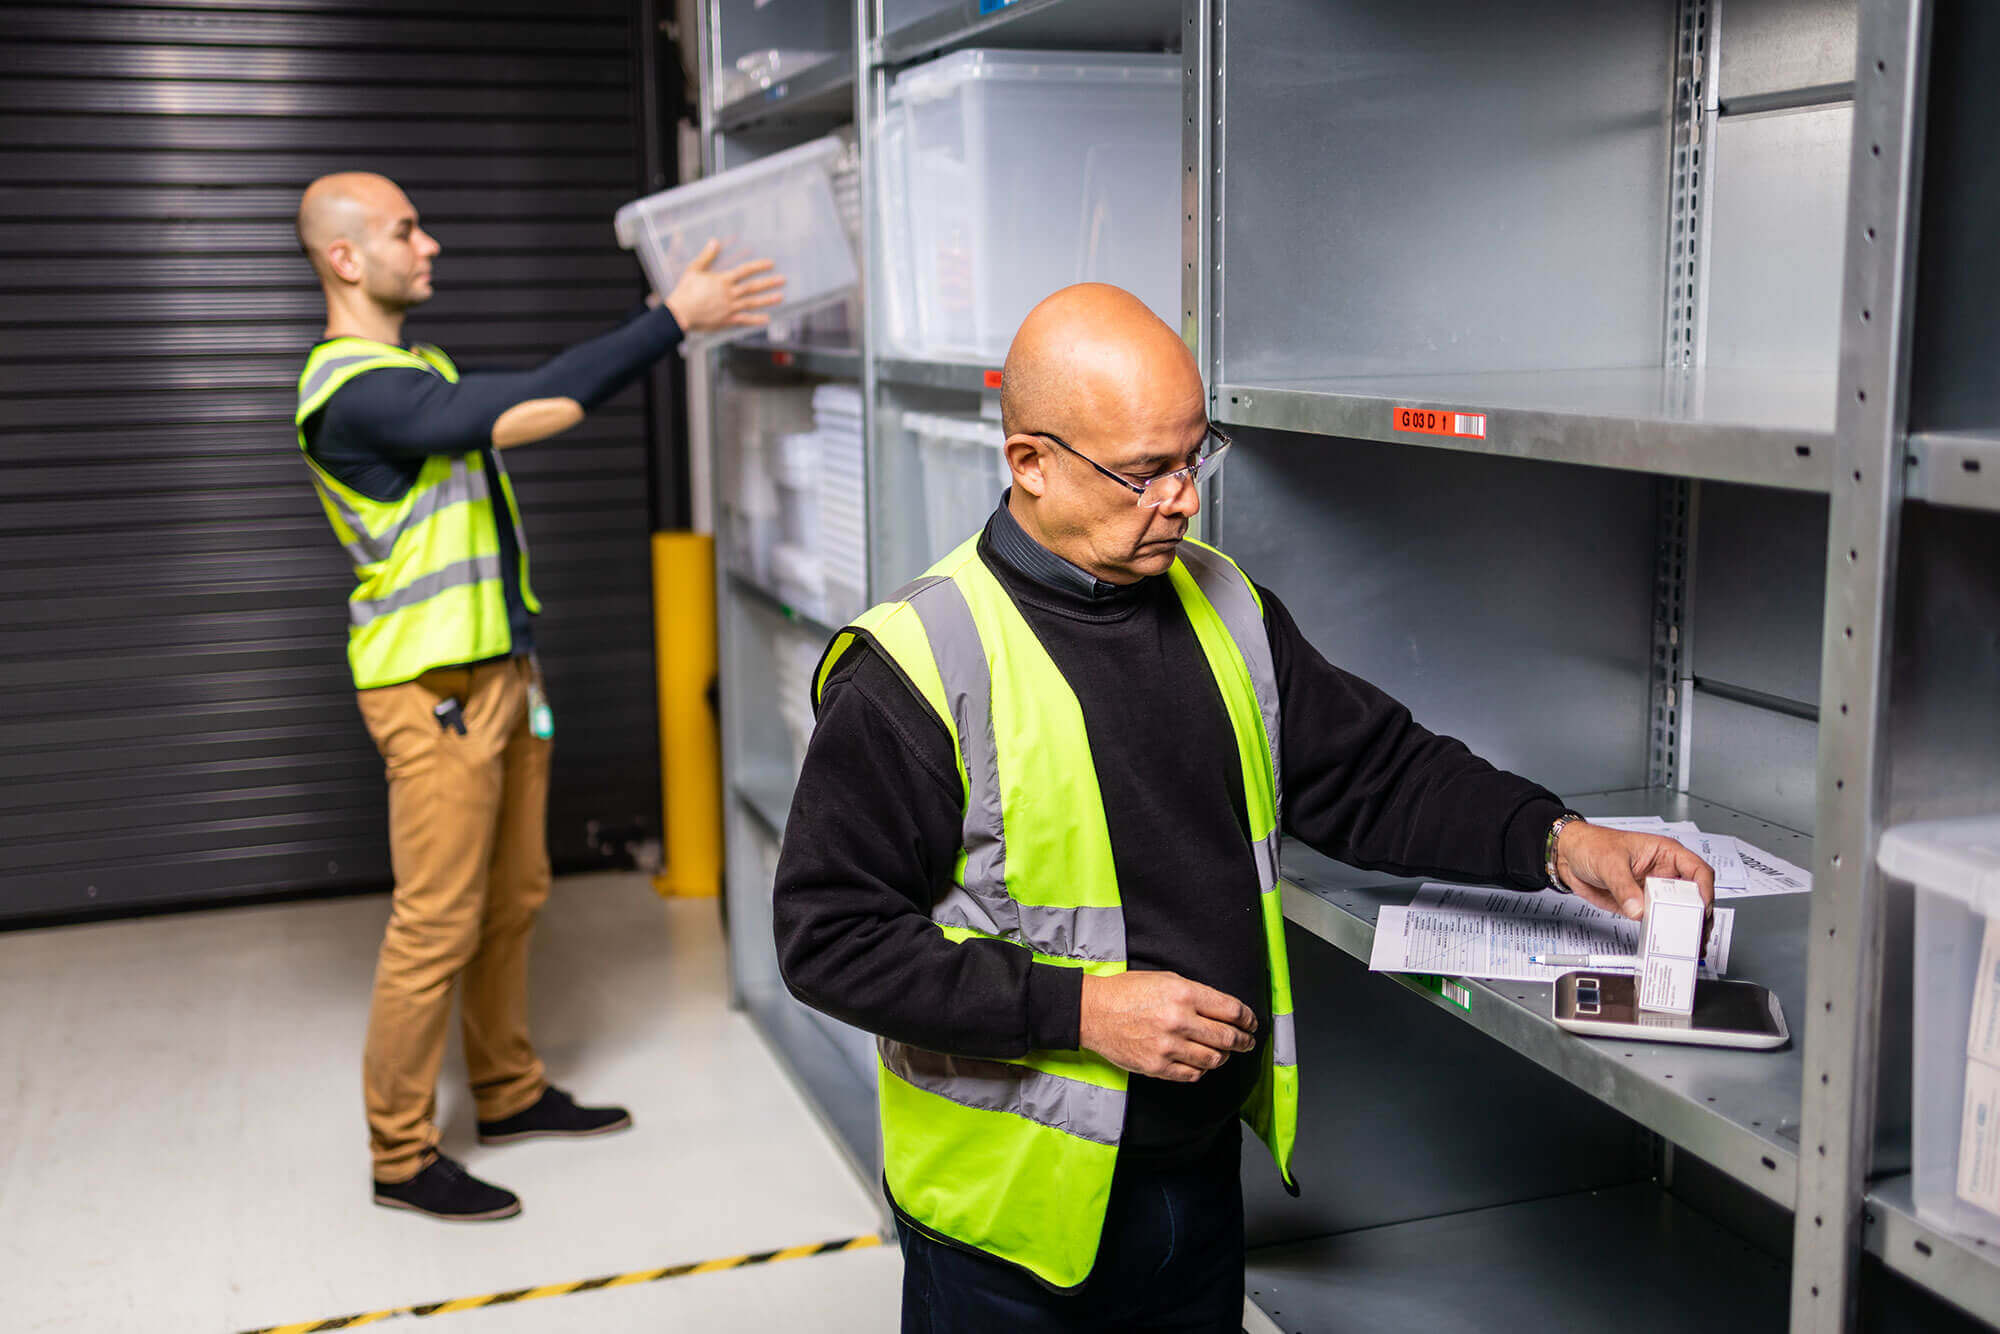 Product inspection at Myonex UK – Clinical Storage and Distribution